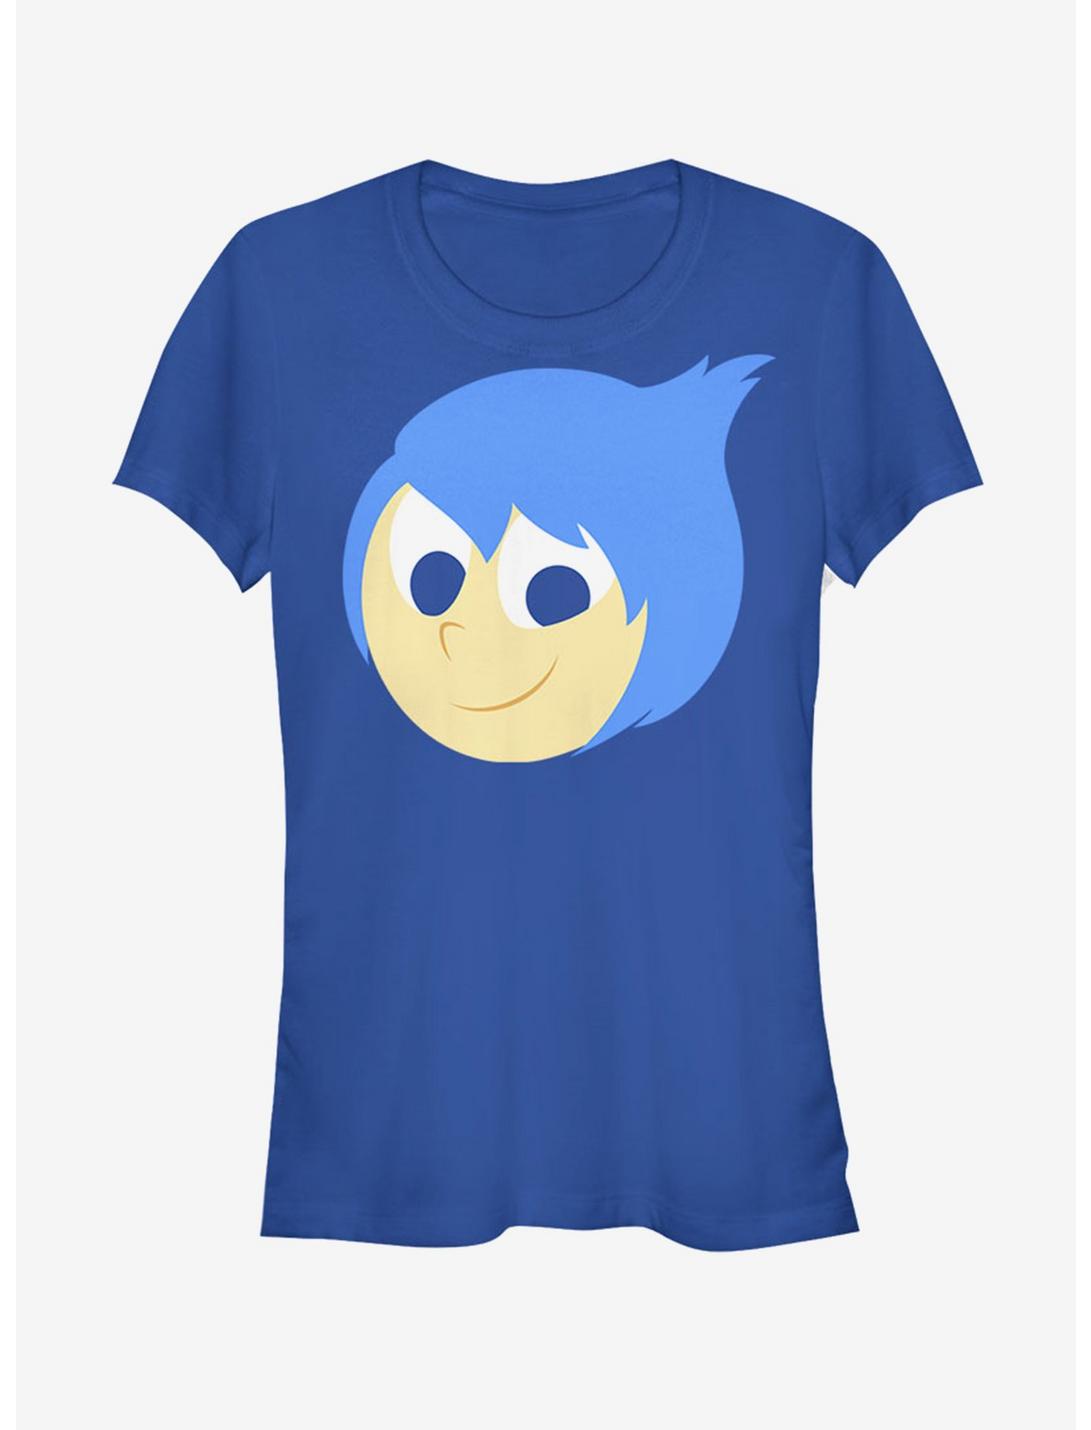 Inside out T-Shirt